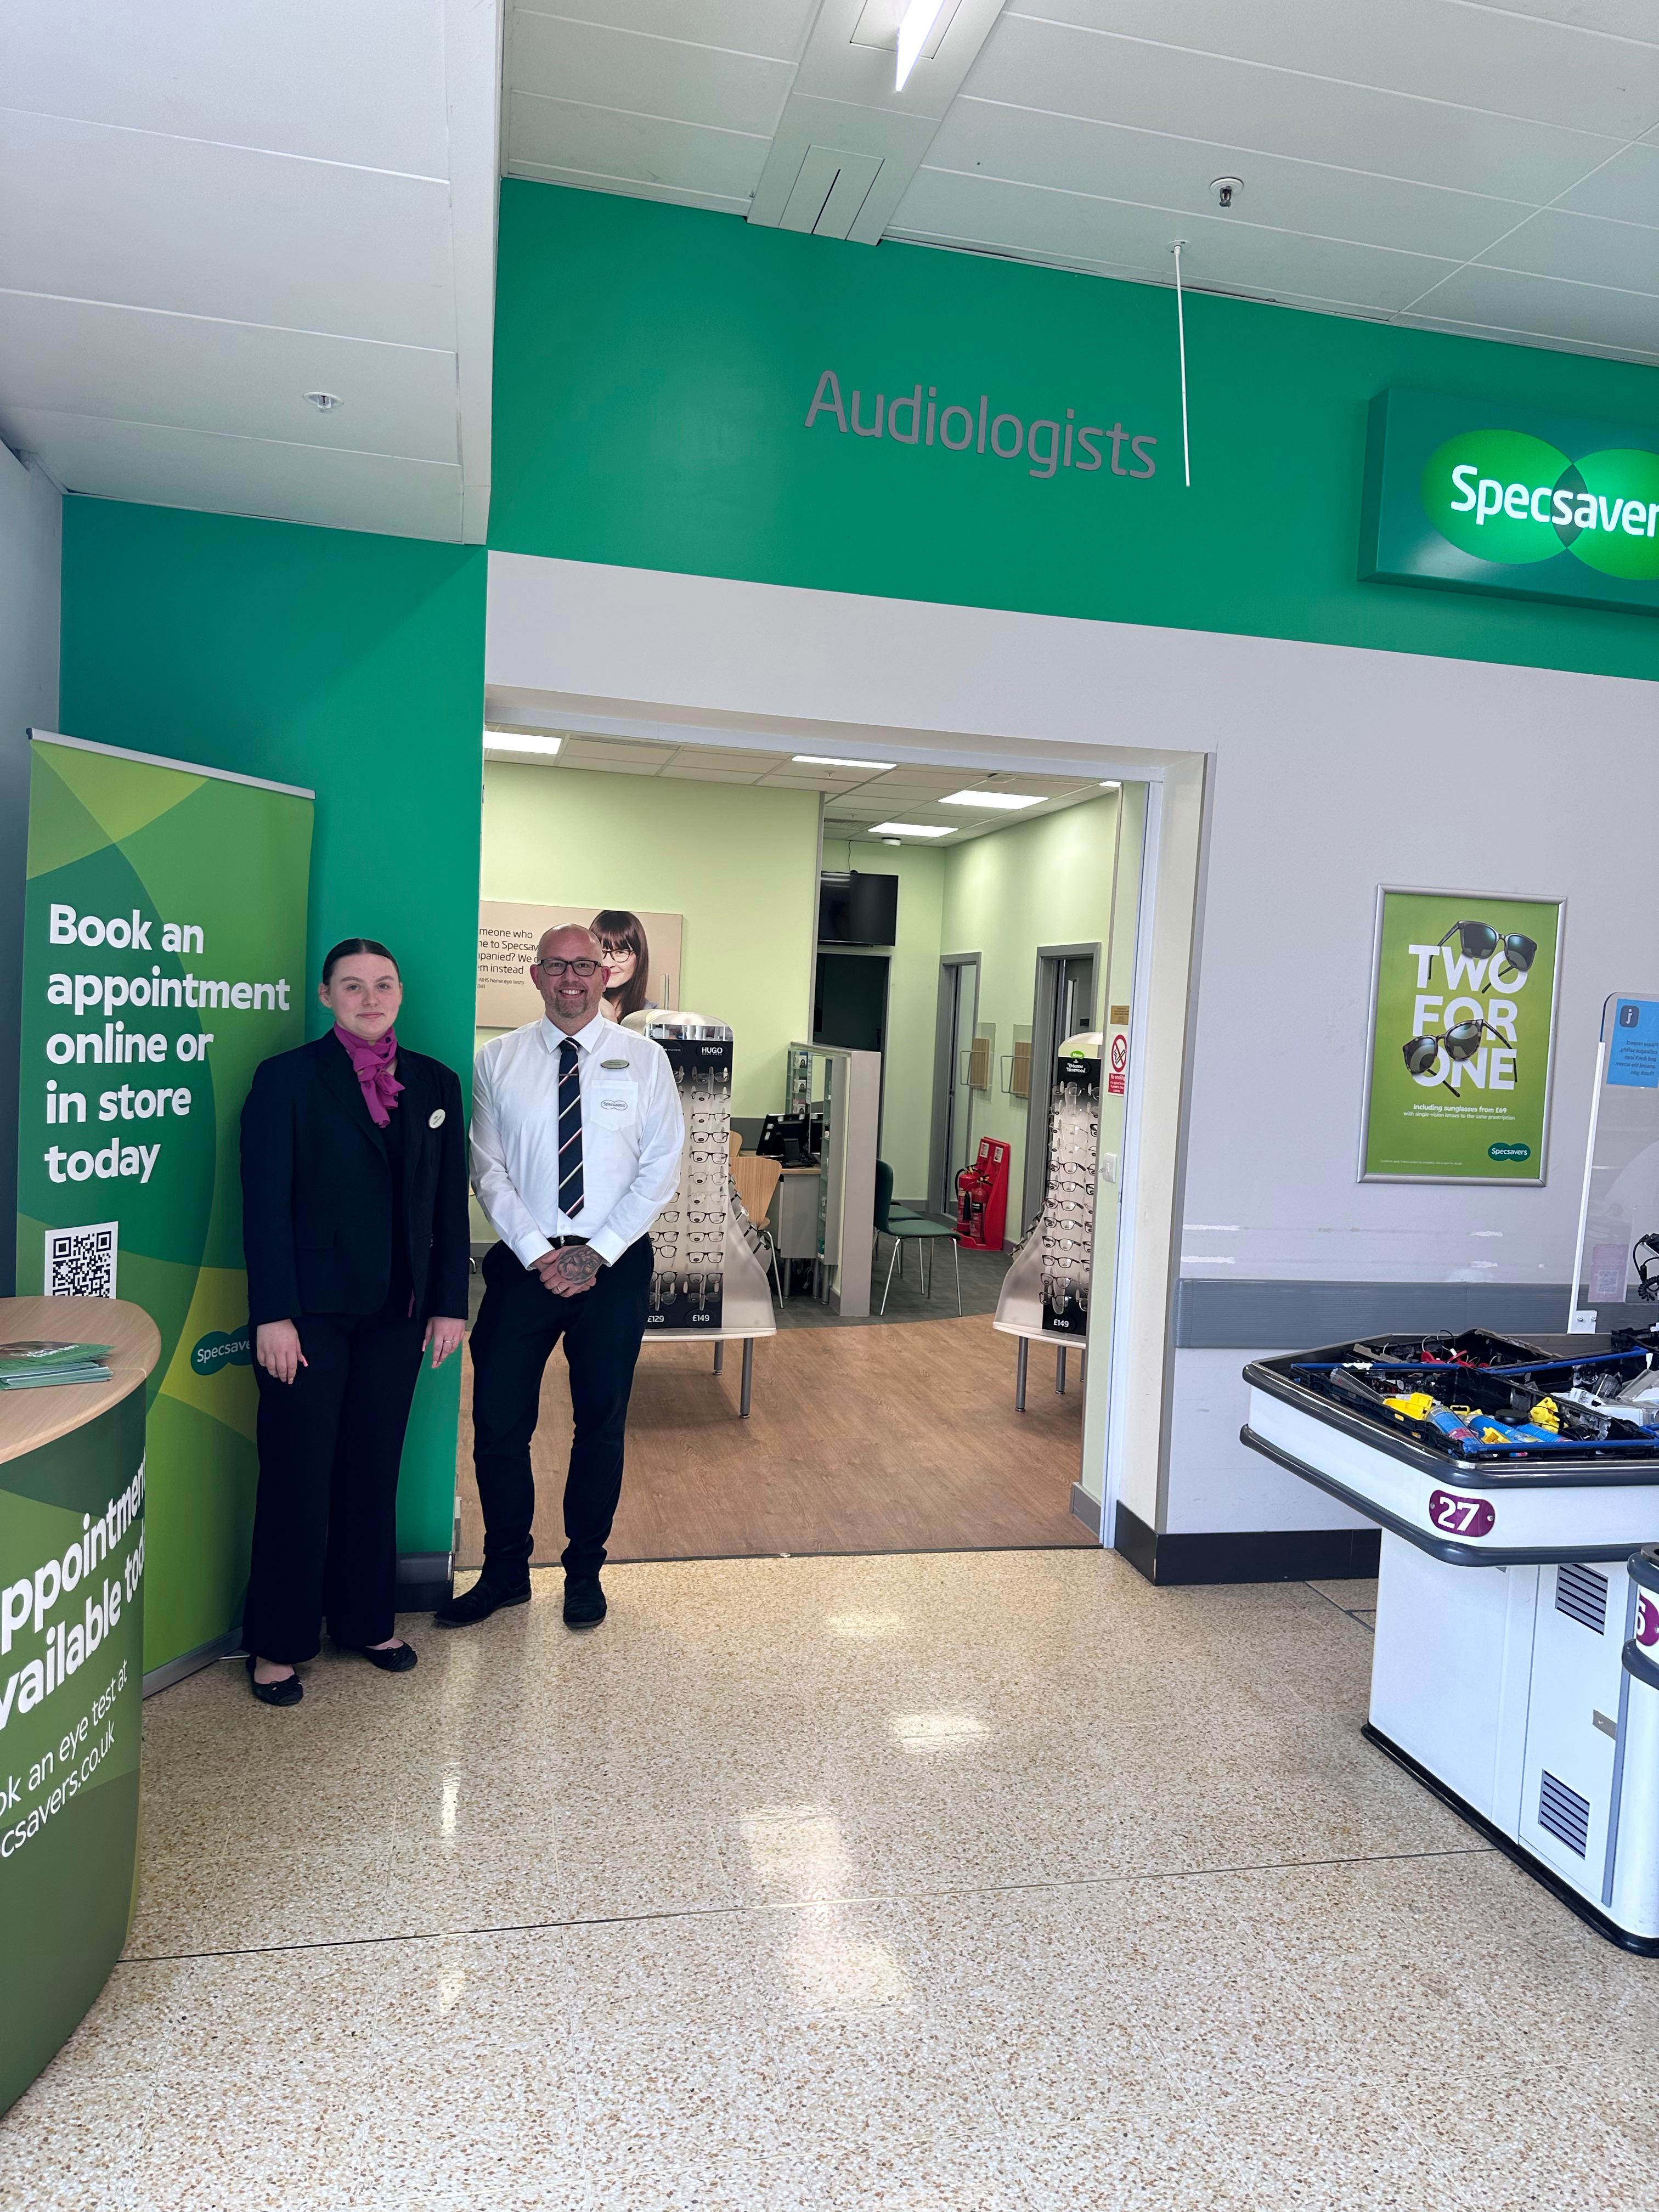 Specsavers Opticians and Audiologists - Archer Road Specsavers Opticians and Audiologists - Archer Road Sheffield 01142 367143